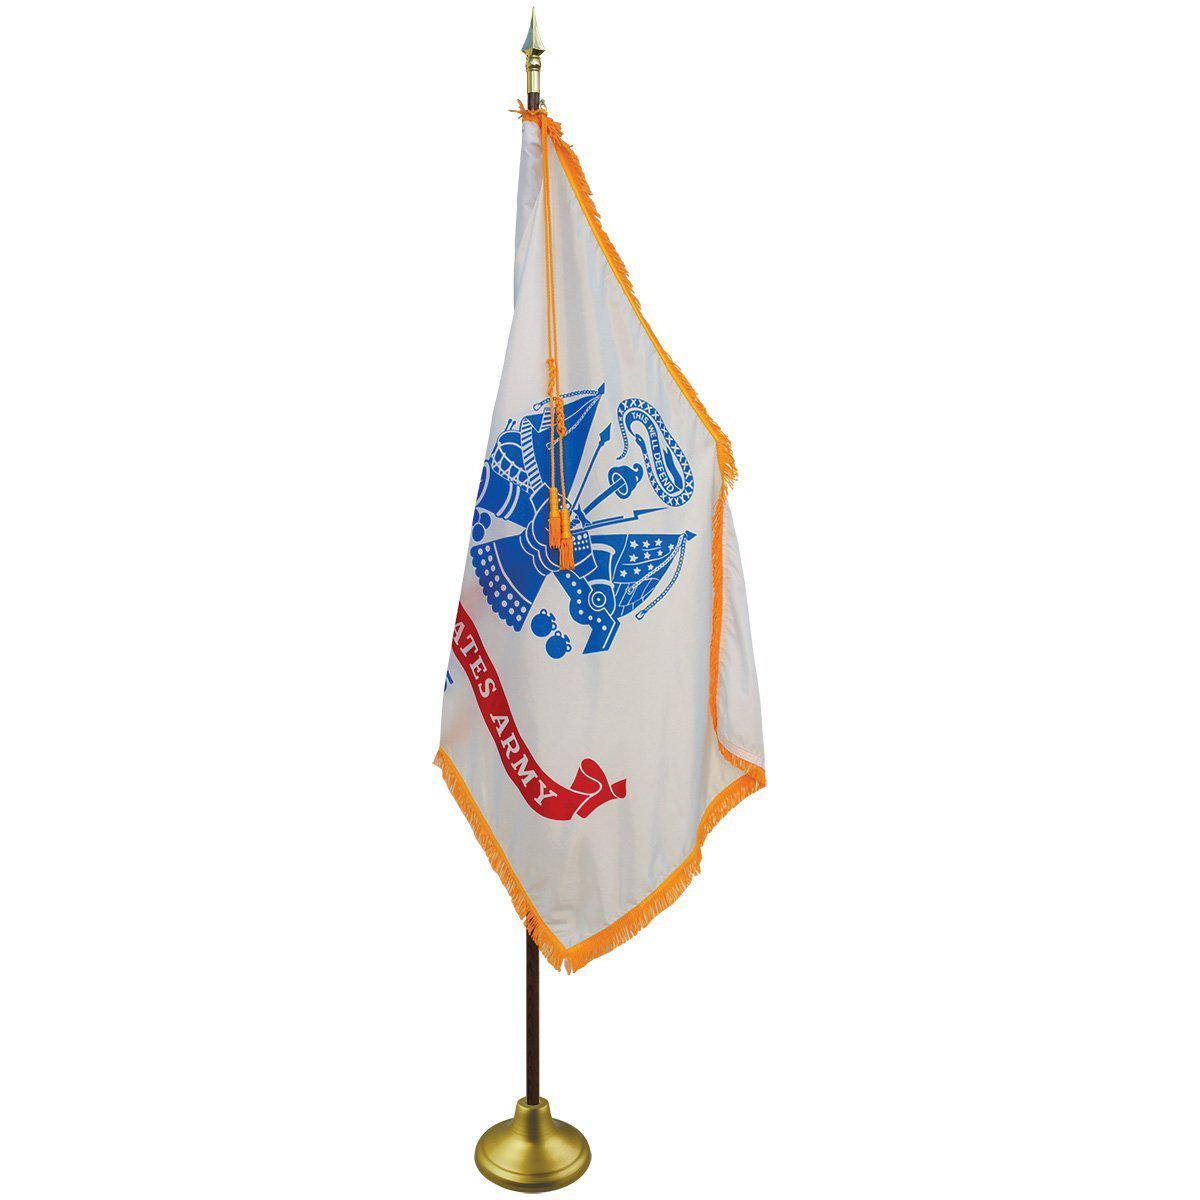 U.S. Army Flag with pole hem and fringe for indoor or parade use